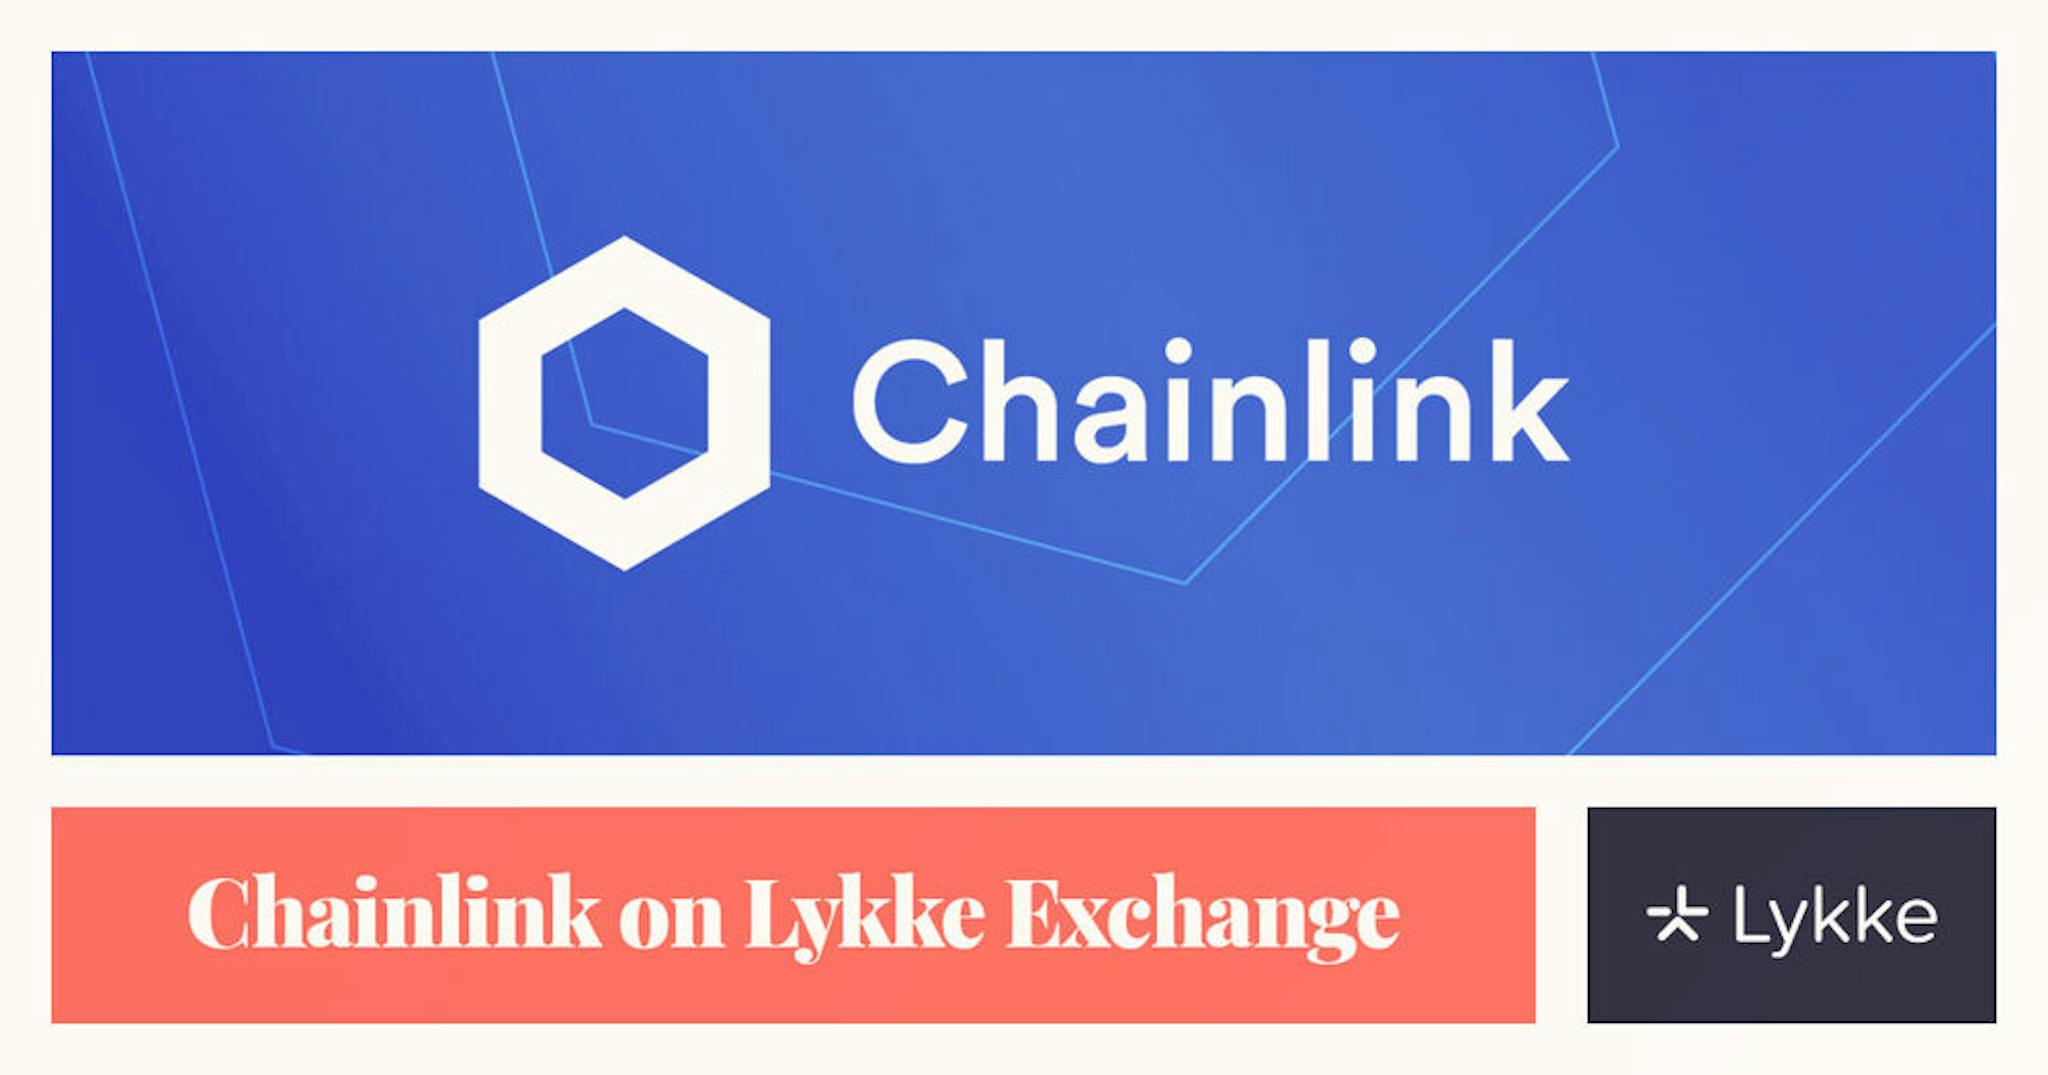 Chainlink on Lykke Exchange